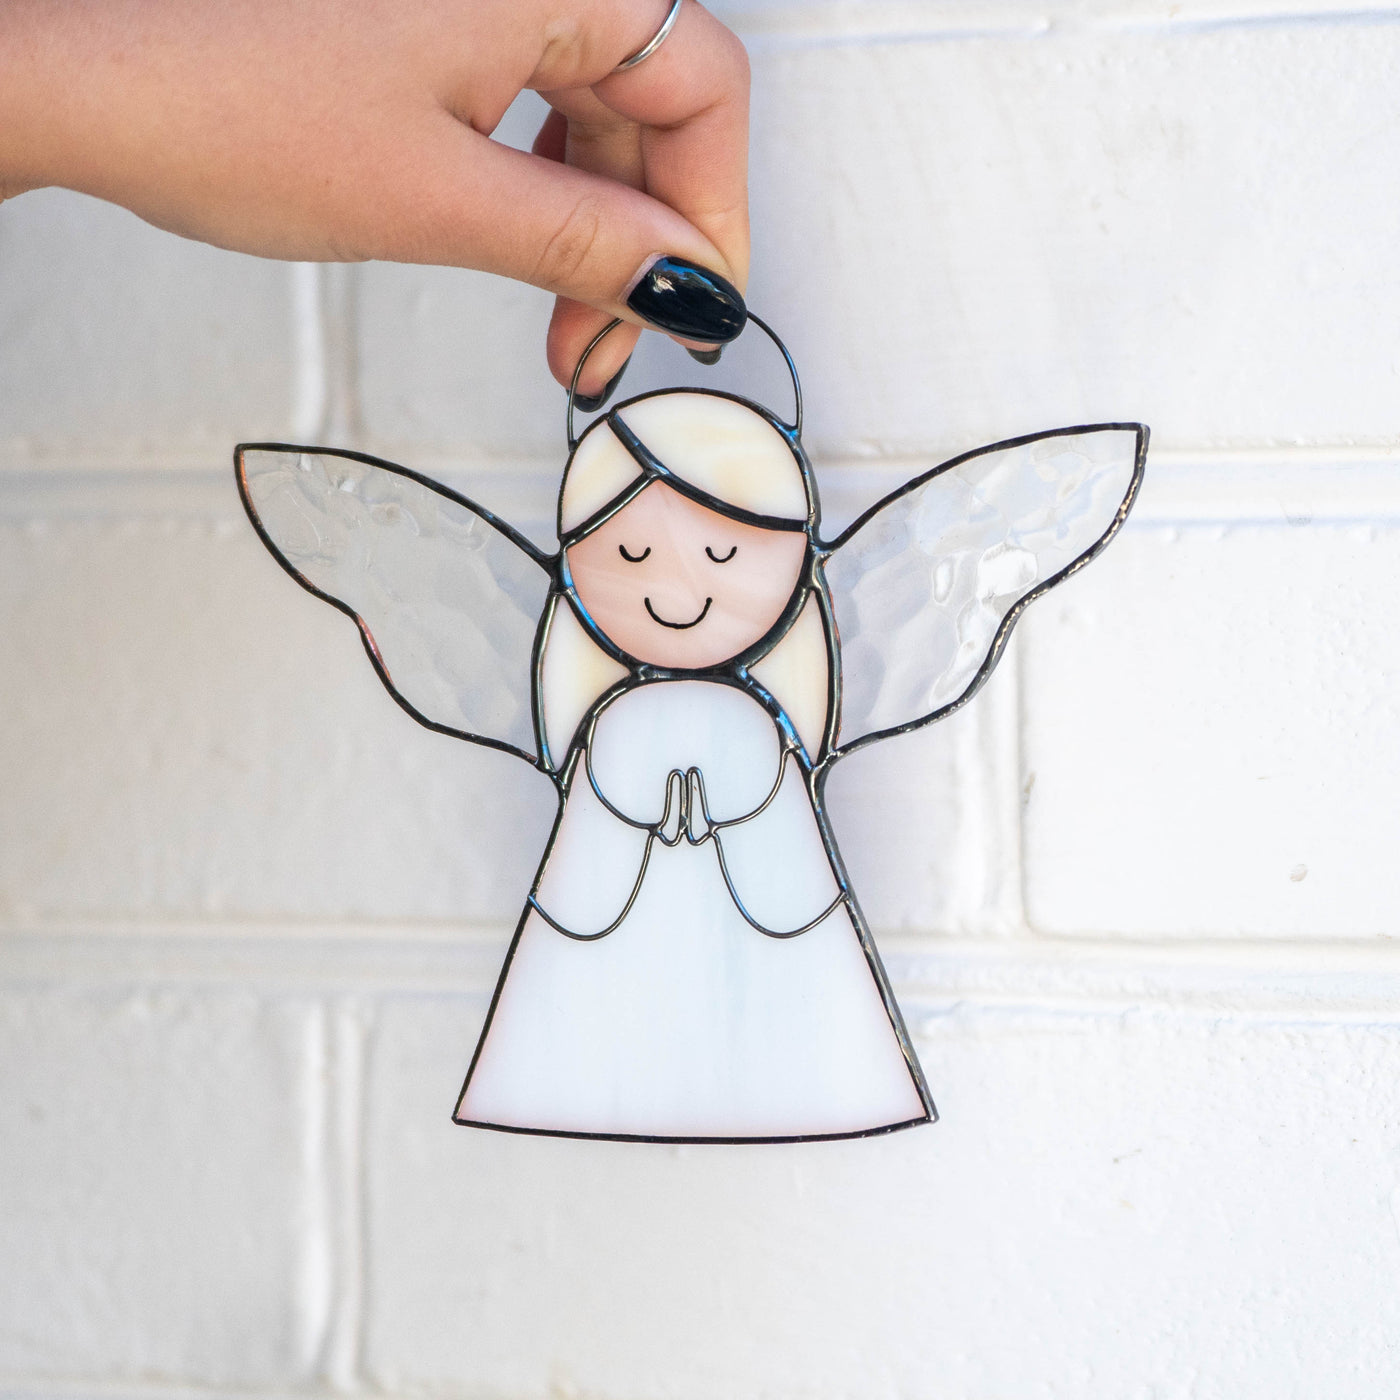 Praying angel girl of stained glass for Christmas 